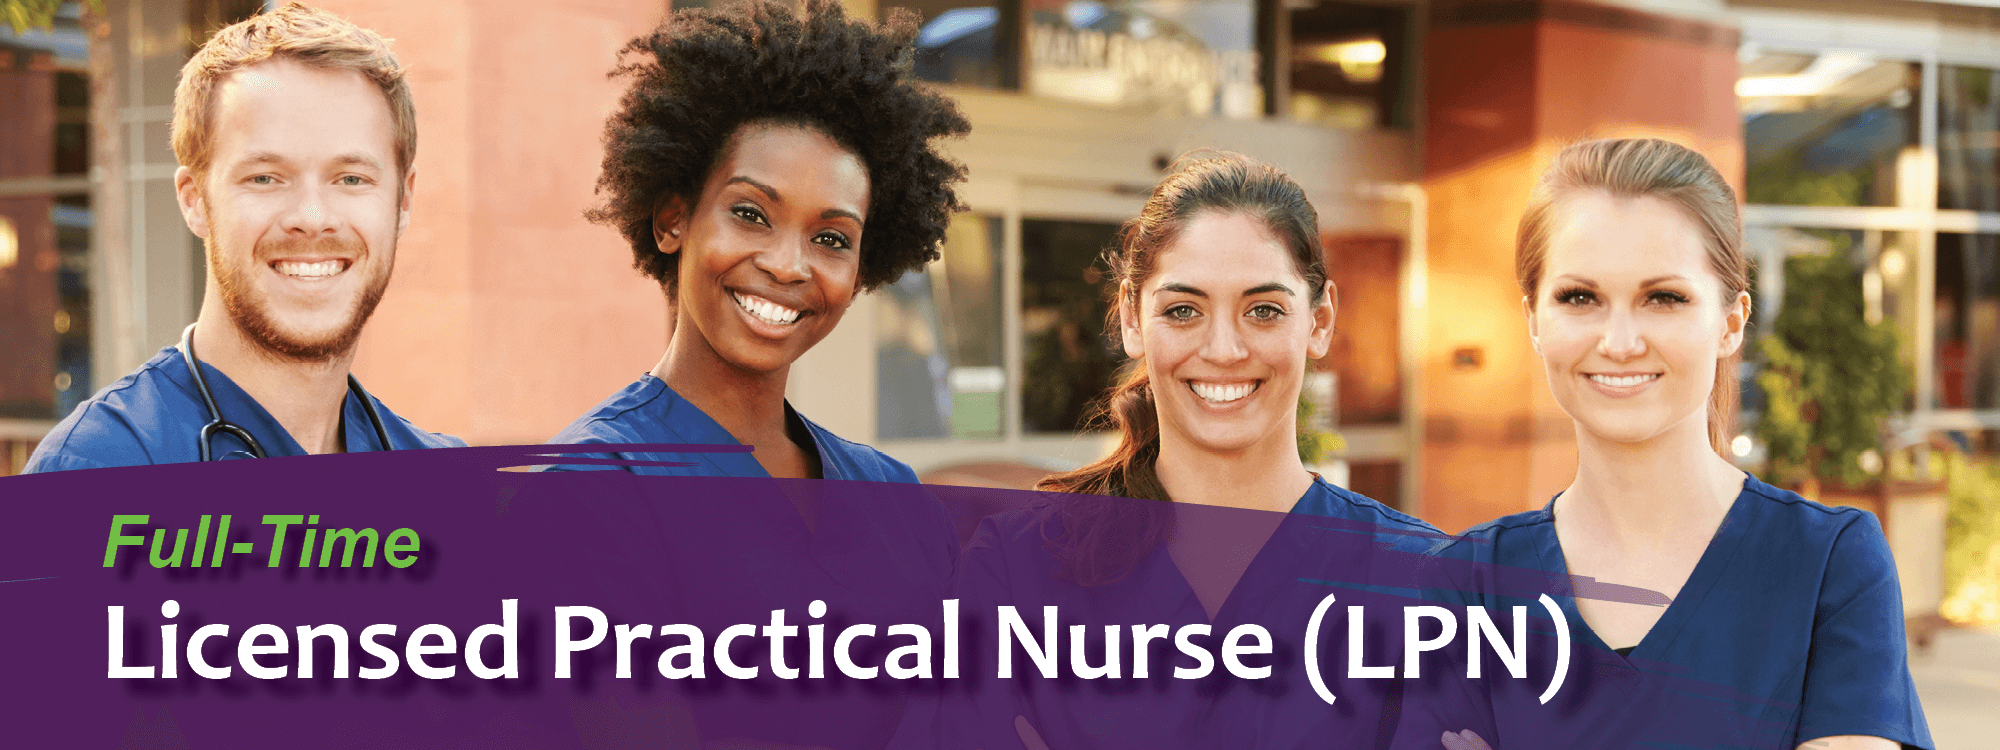 Group of proud nurses standing together. Image text: Full-time Licensed Practical Nurse (LPN)